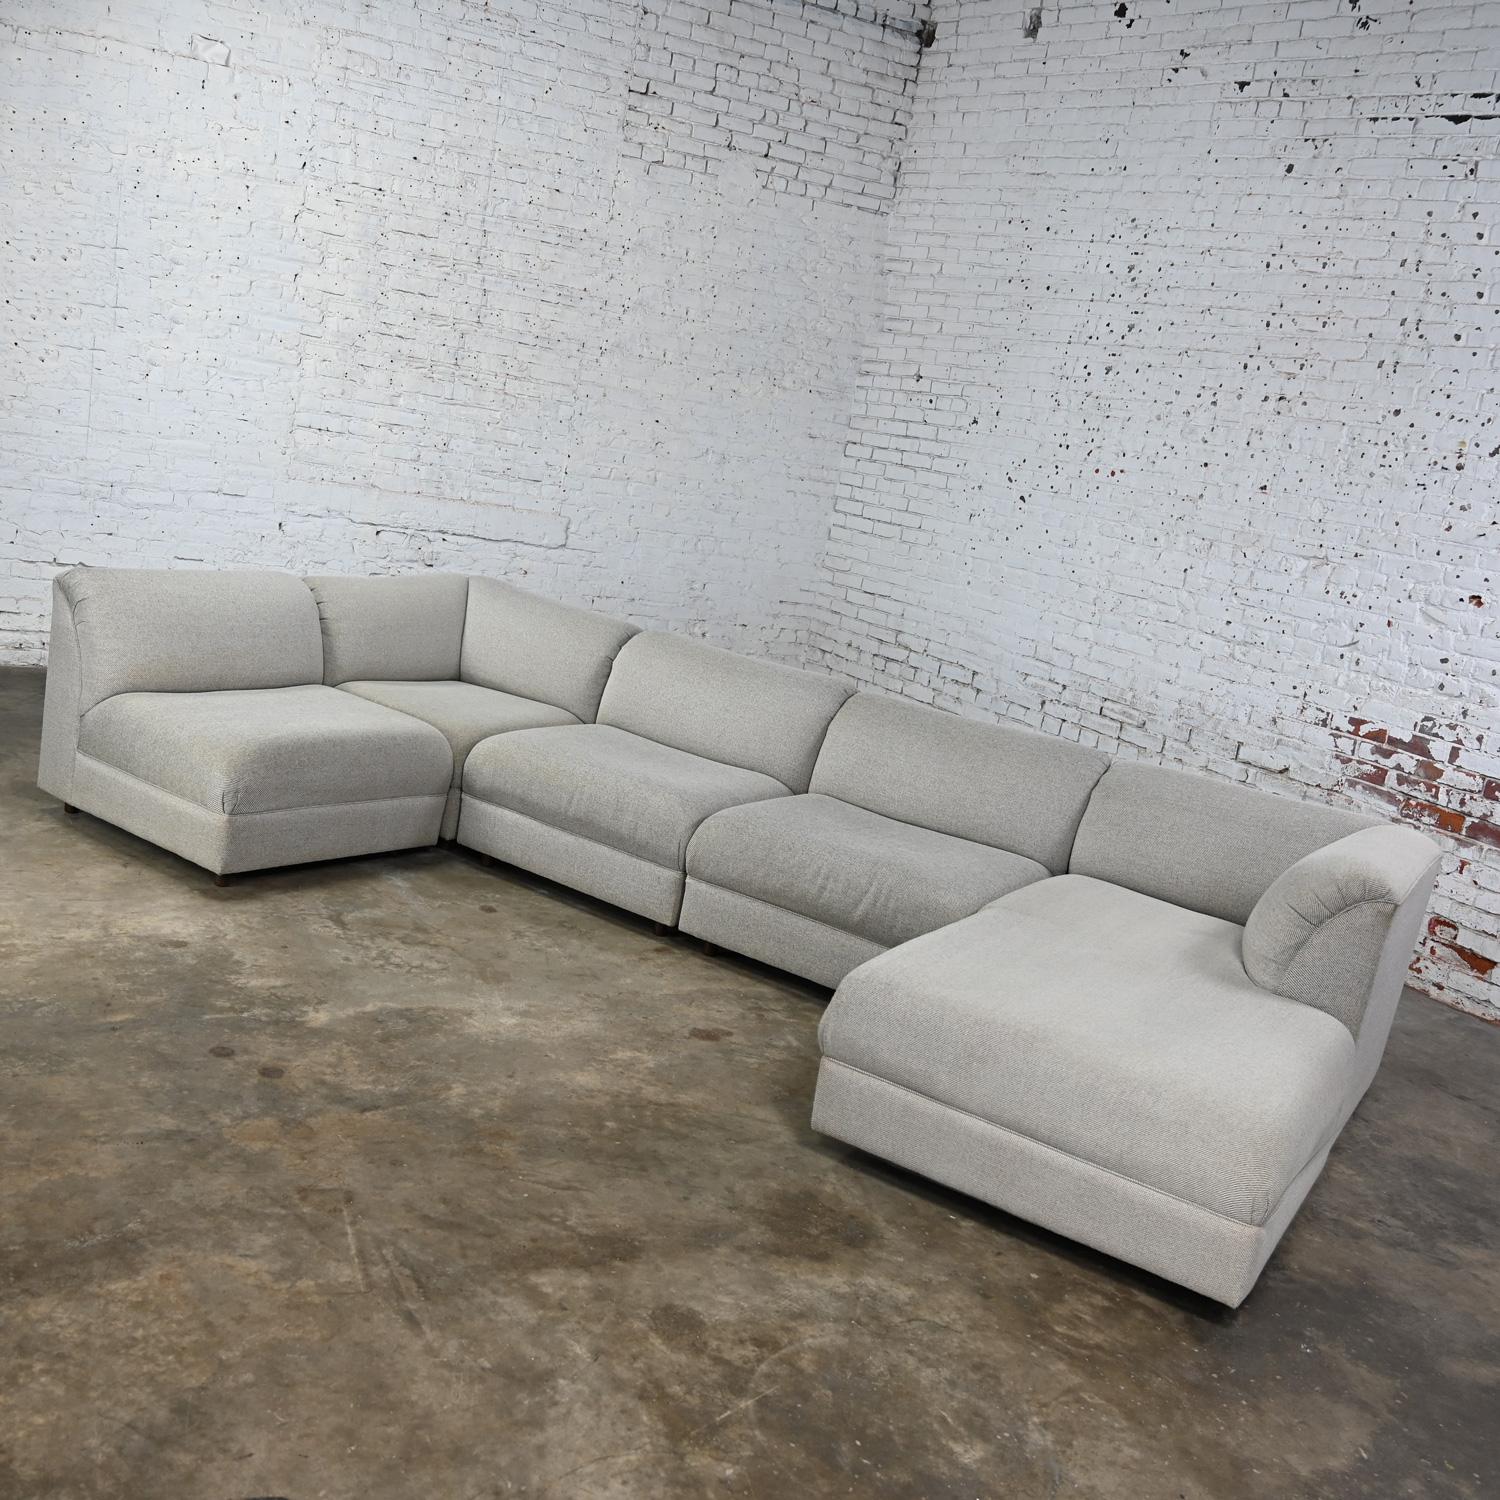 Late 20th Century Modern Modular Sectional Sofa 5 Pieces with Chaise Gray Tweed  For Sale 7